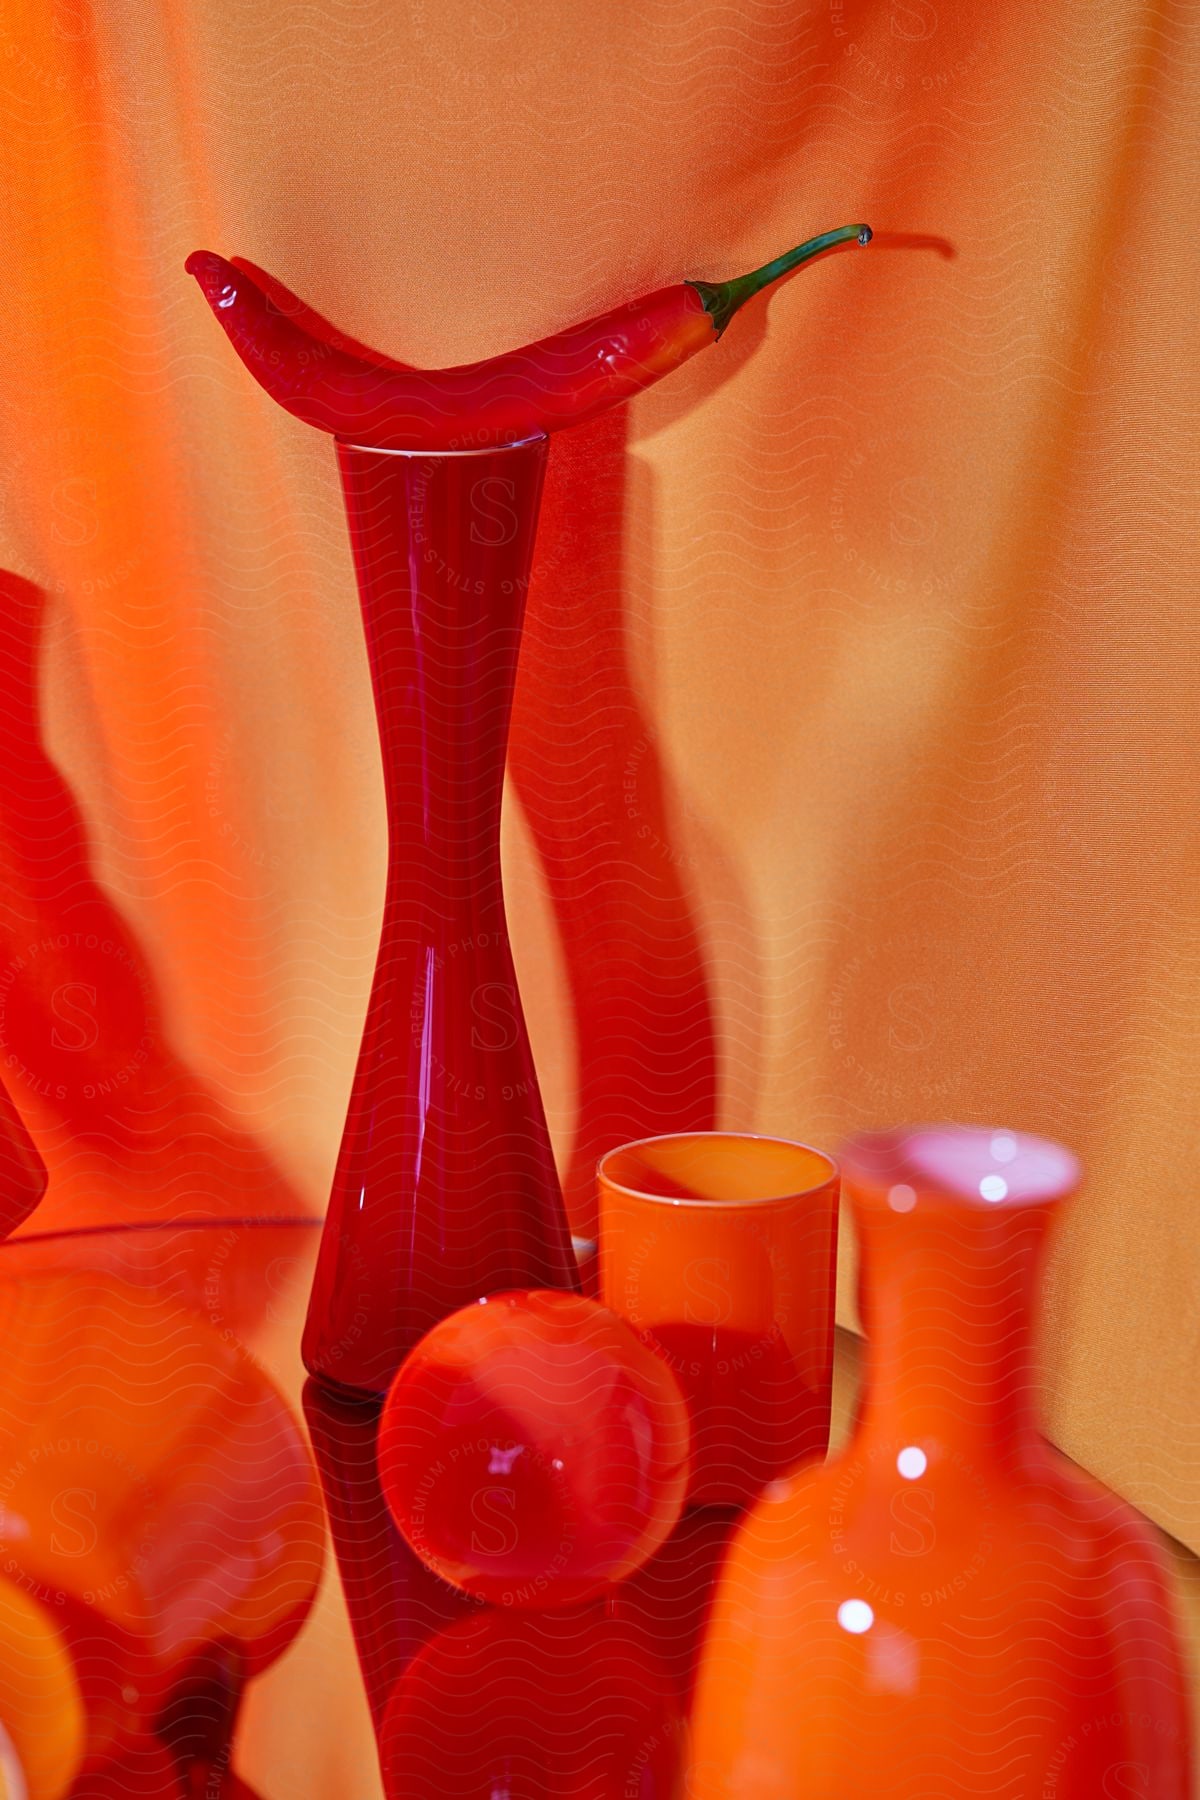 Collection of red and orange glassware on reflective surface with orange fabric background. A red chili pepper rests on top of a tall red vase.